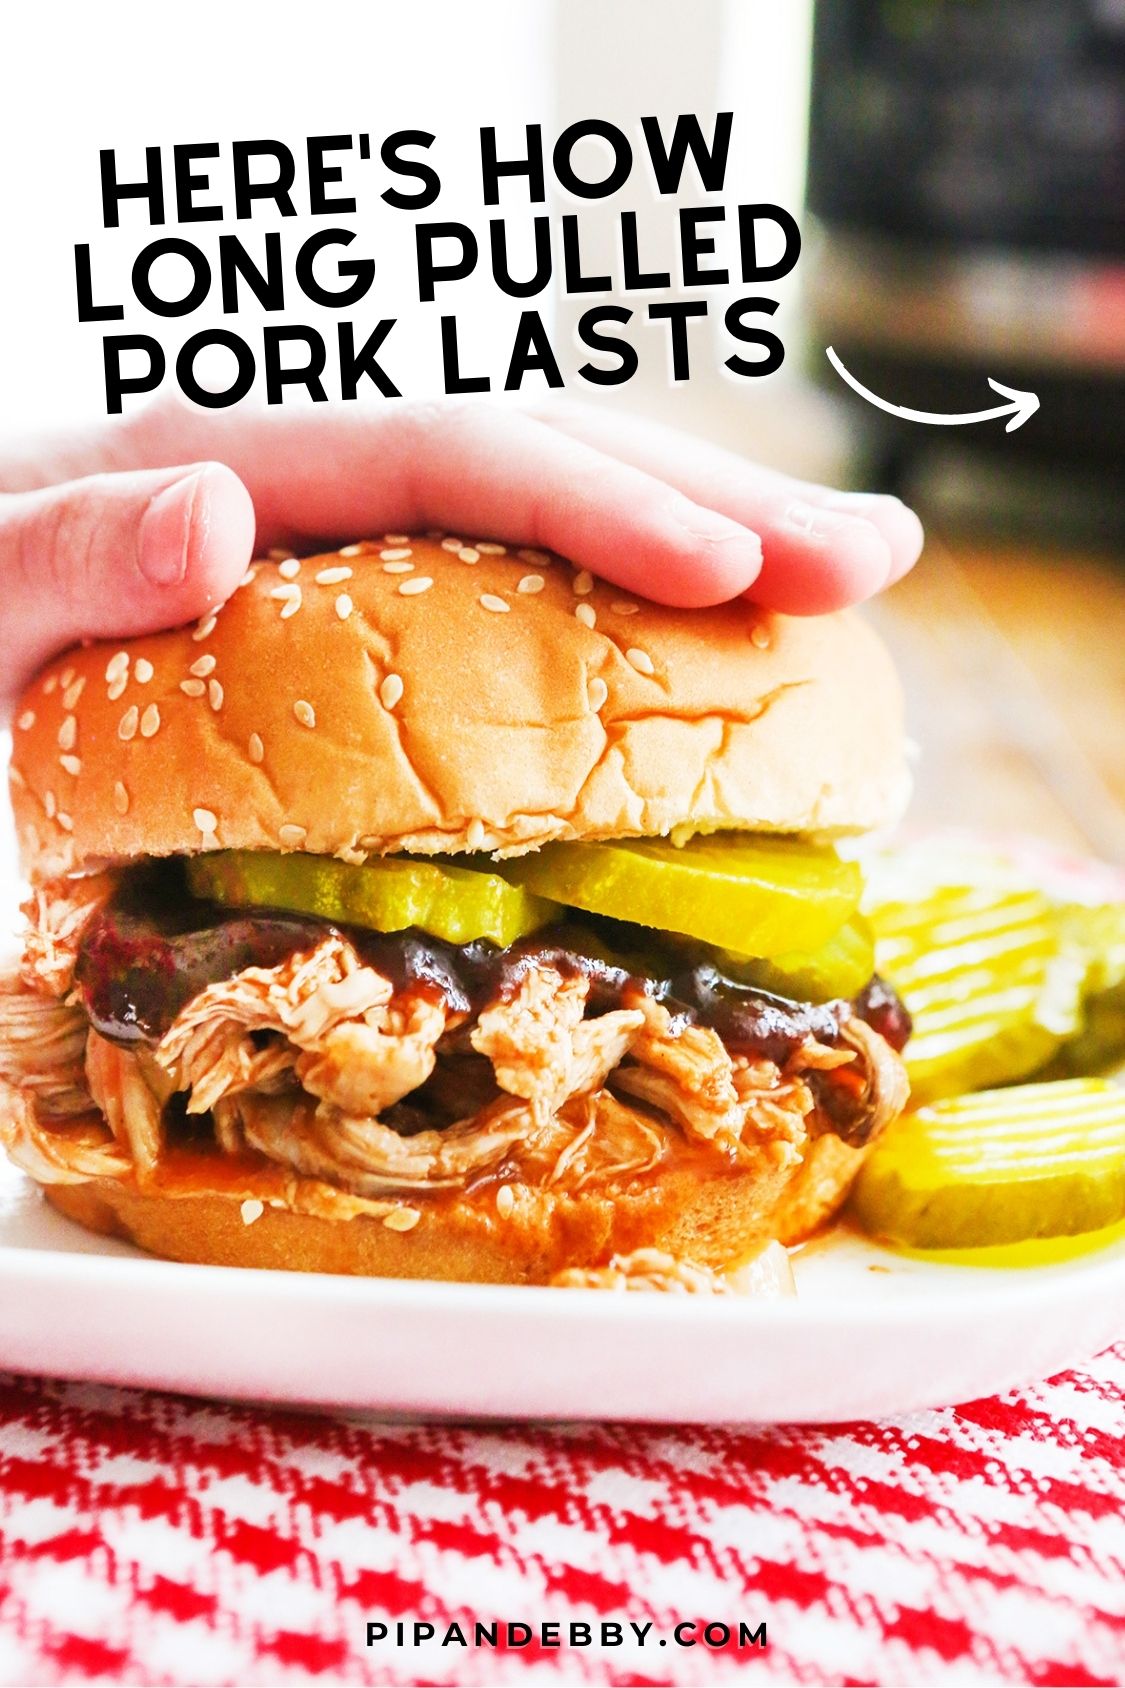 Photo of a pulled pork sandwich on a plate with text overlay reading, "Here's how long pulled pork lasts."